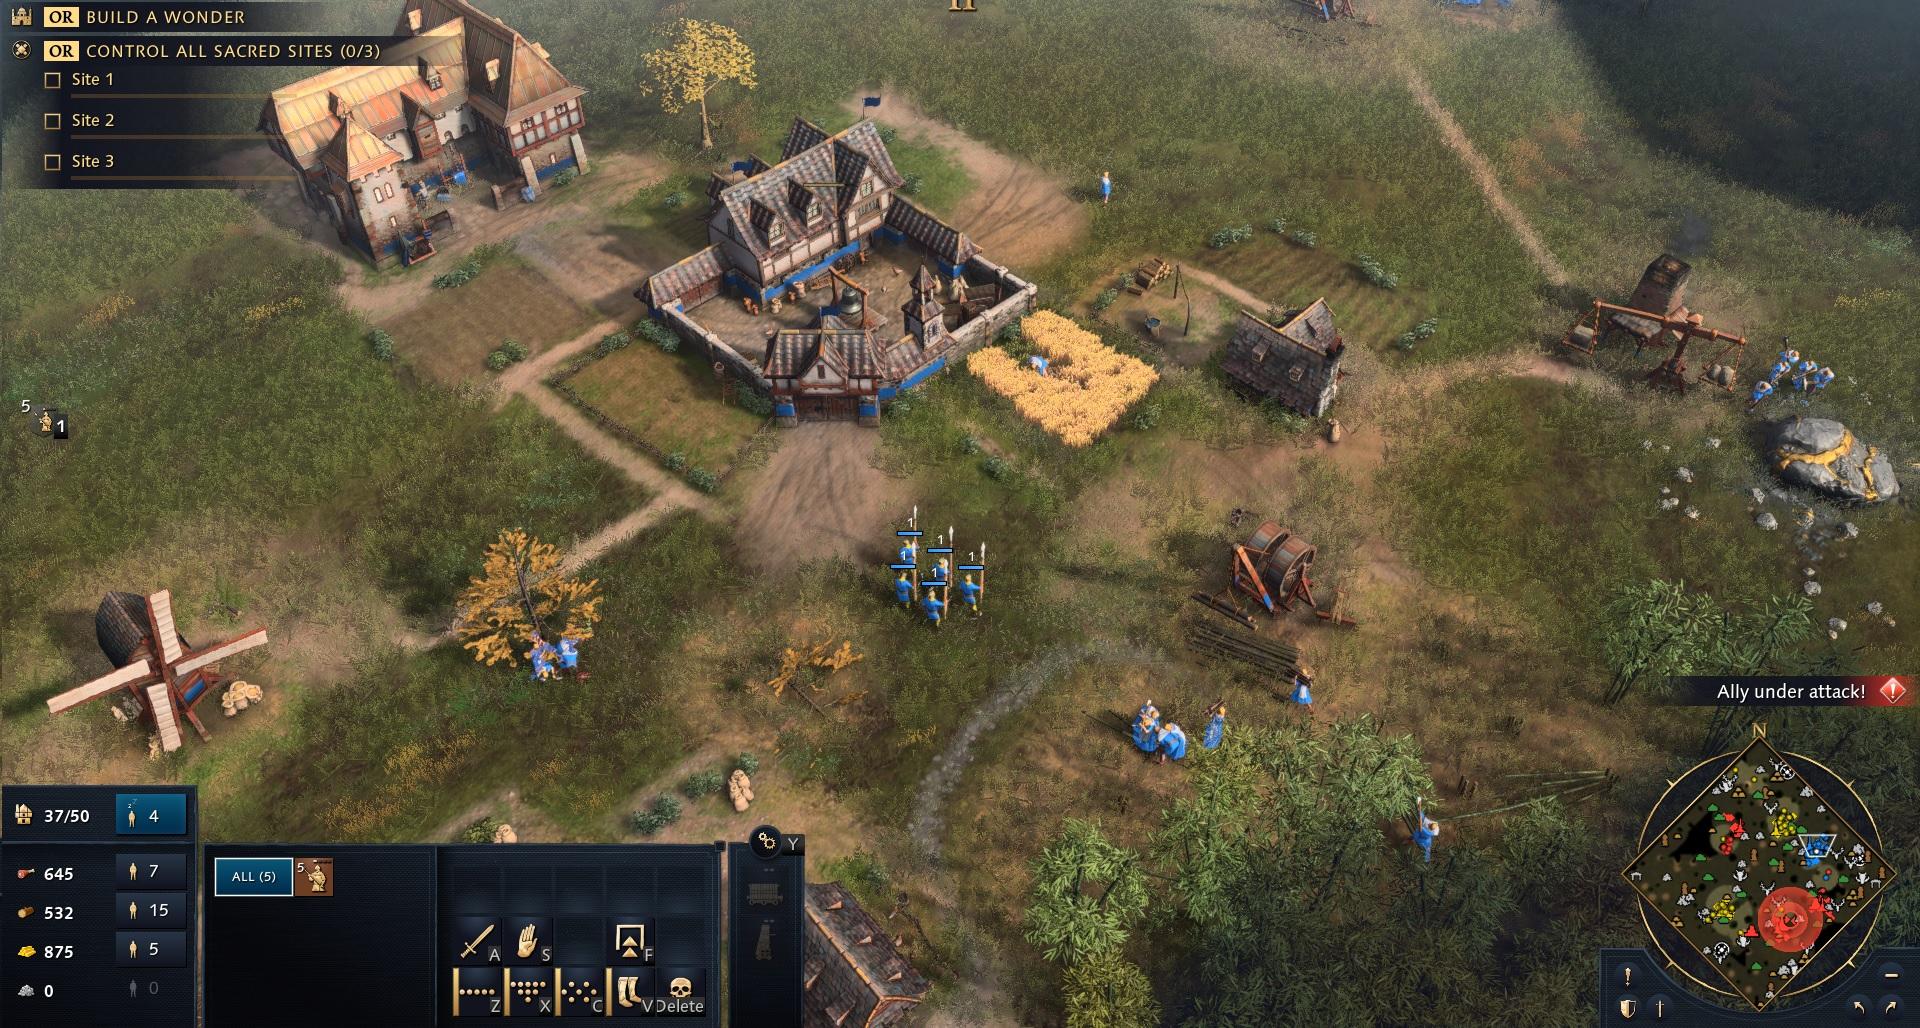 In-game screenshot of Age of Empires 4 town center.